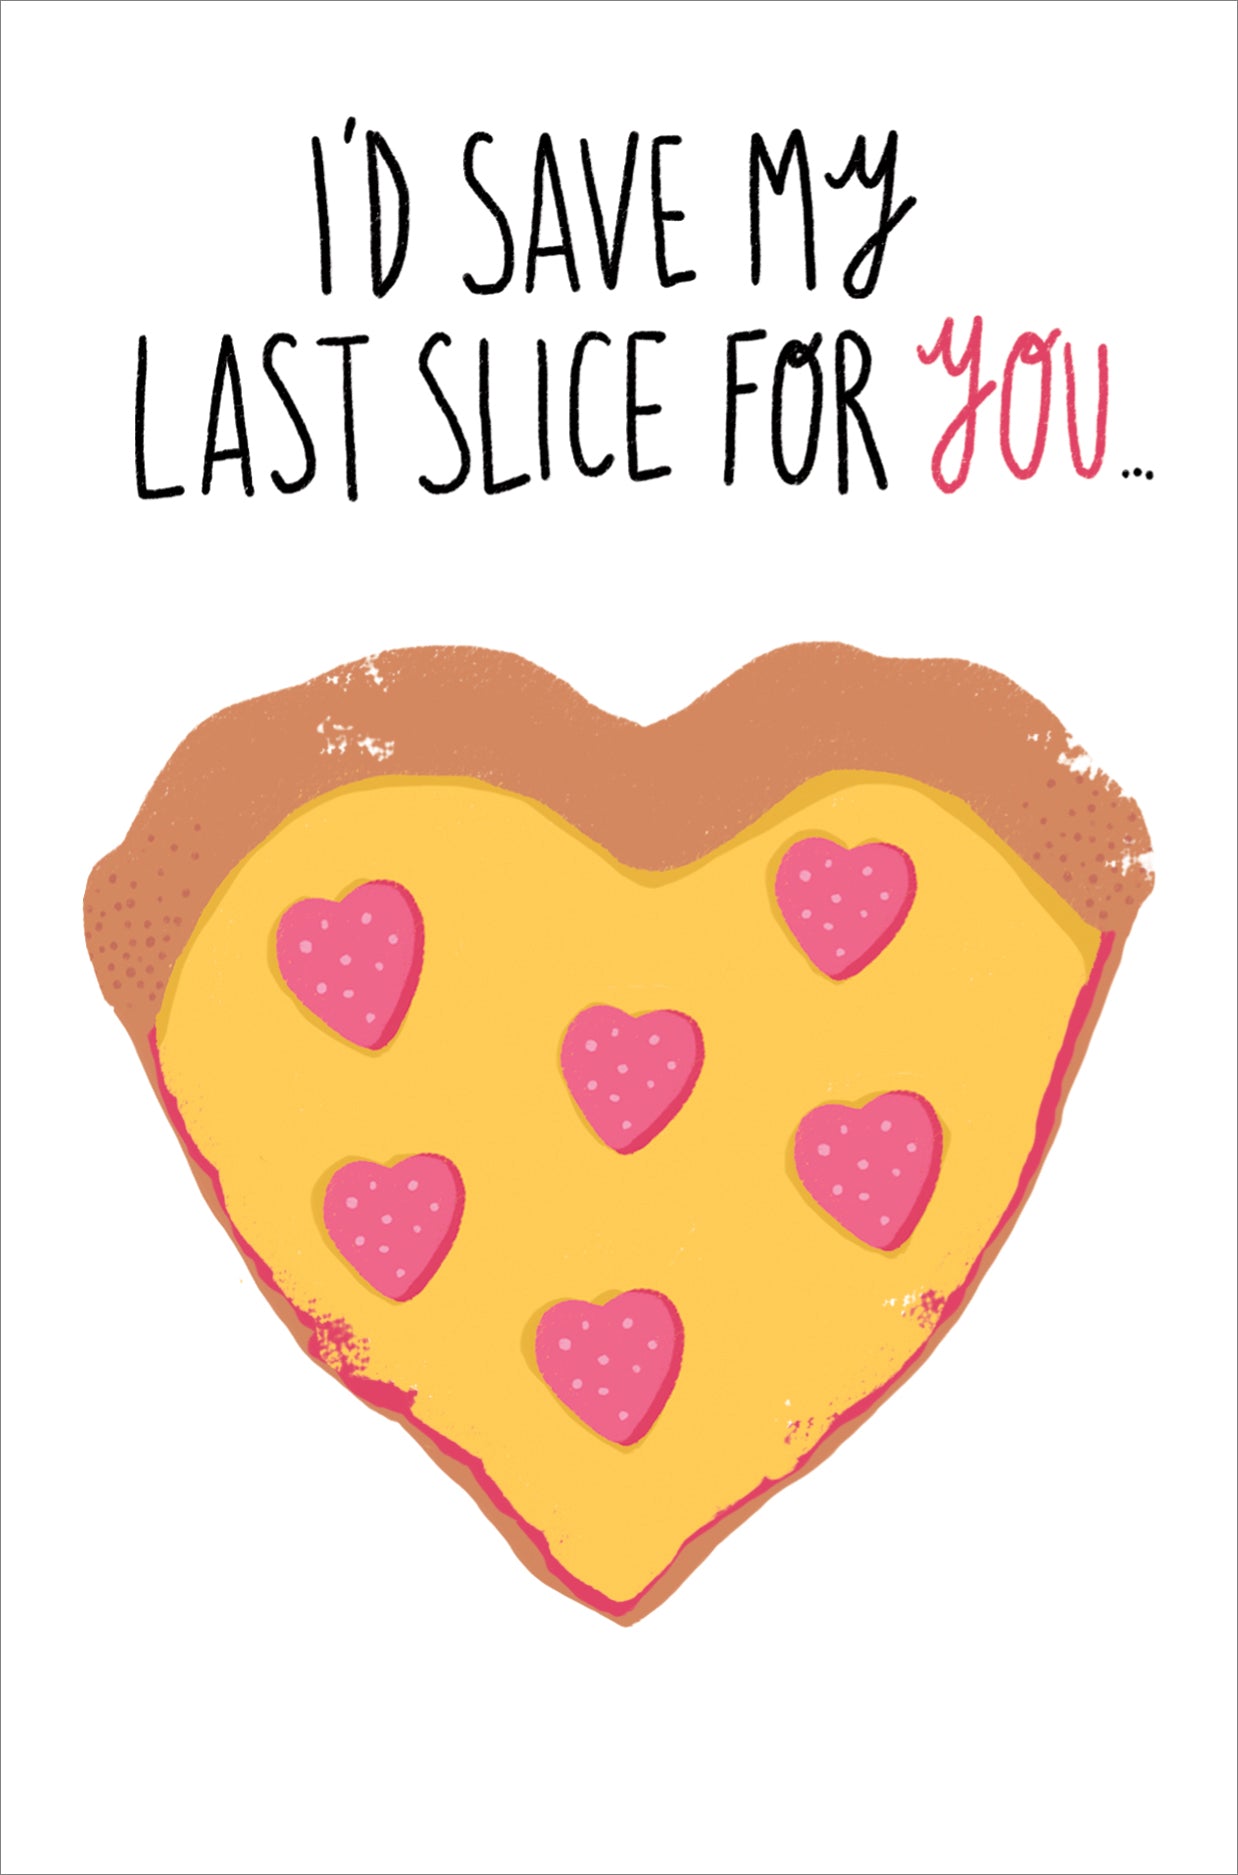 I'd Save My Last Slice For You Humour Valentine's Day Card